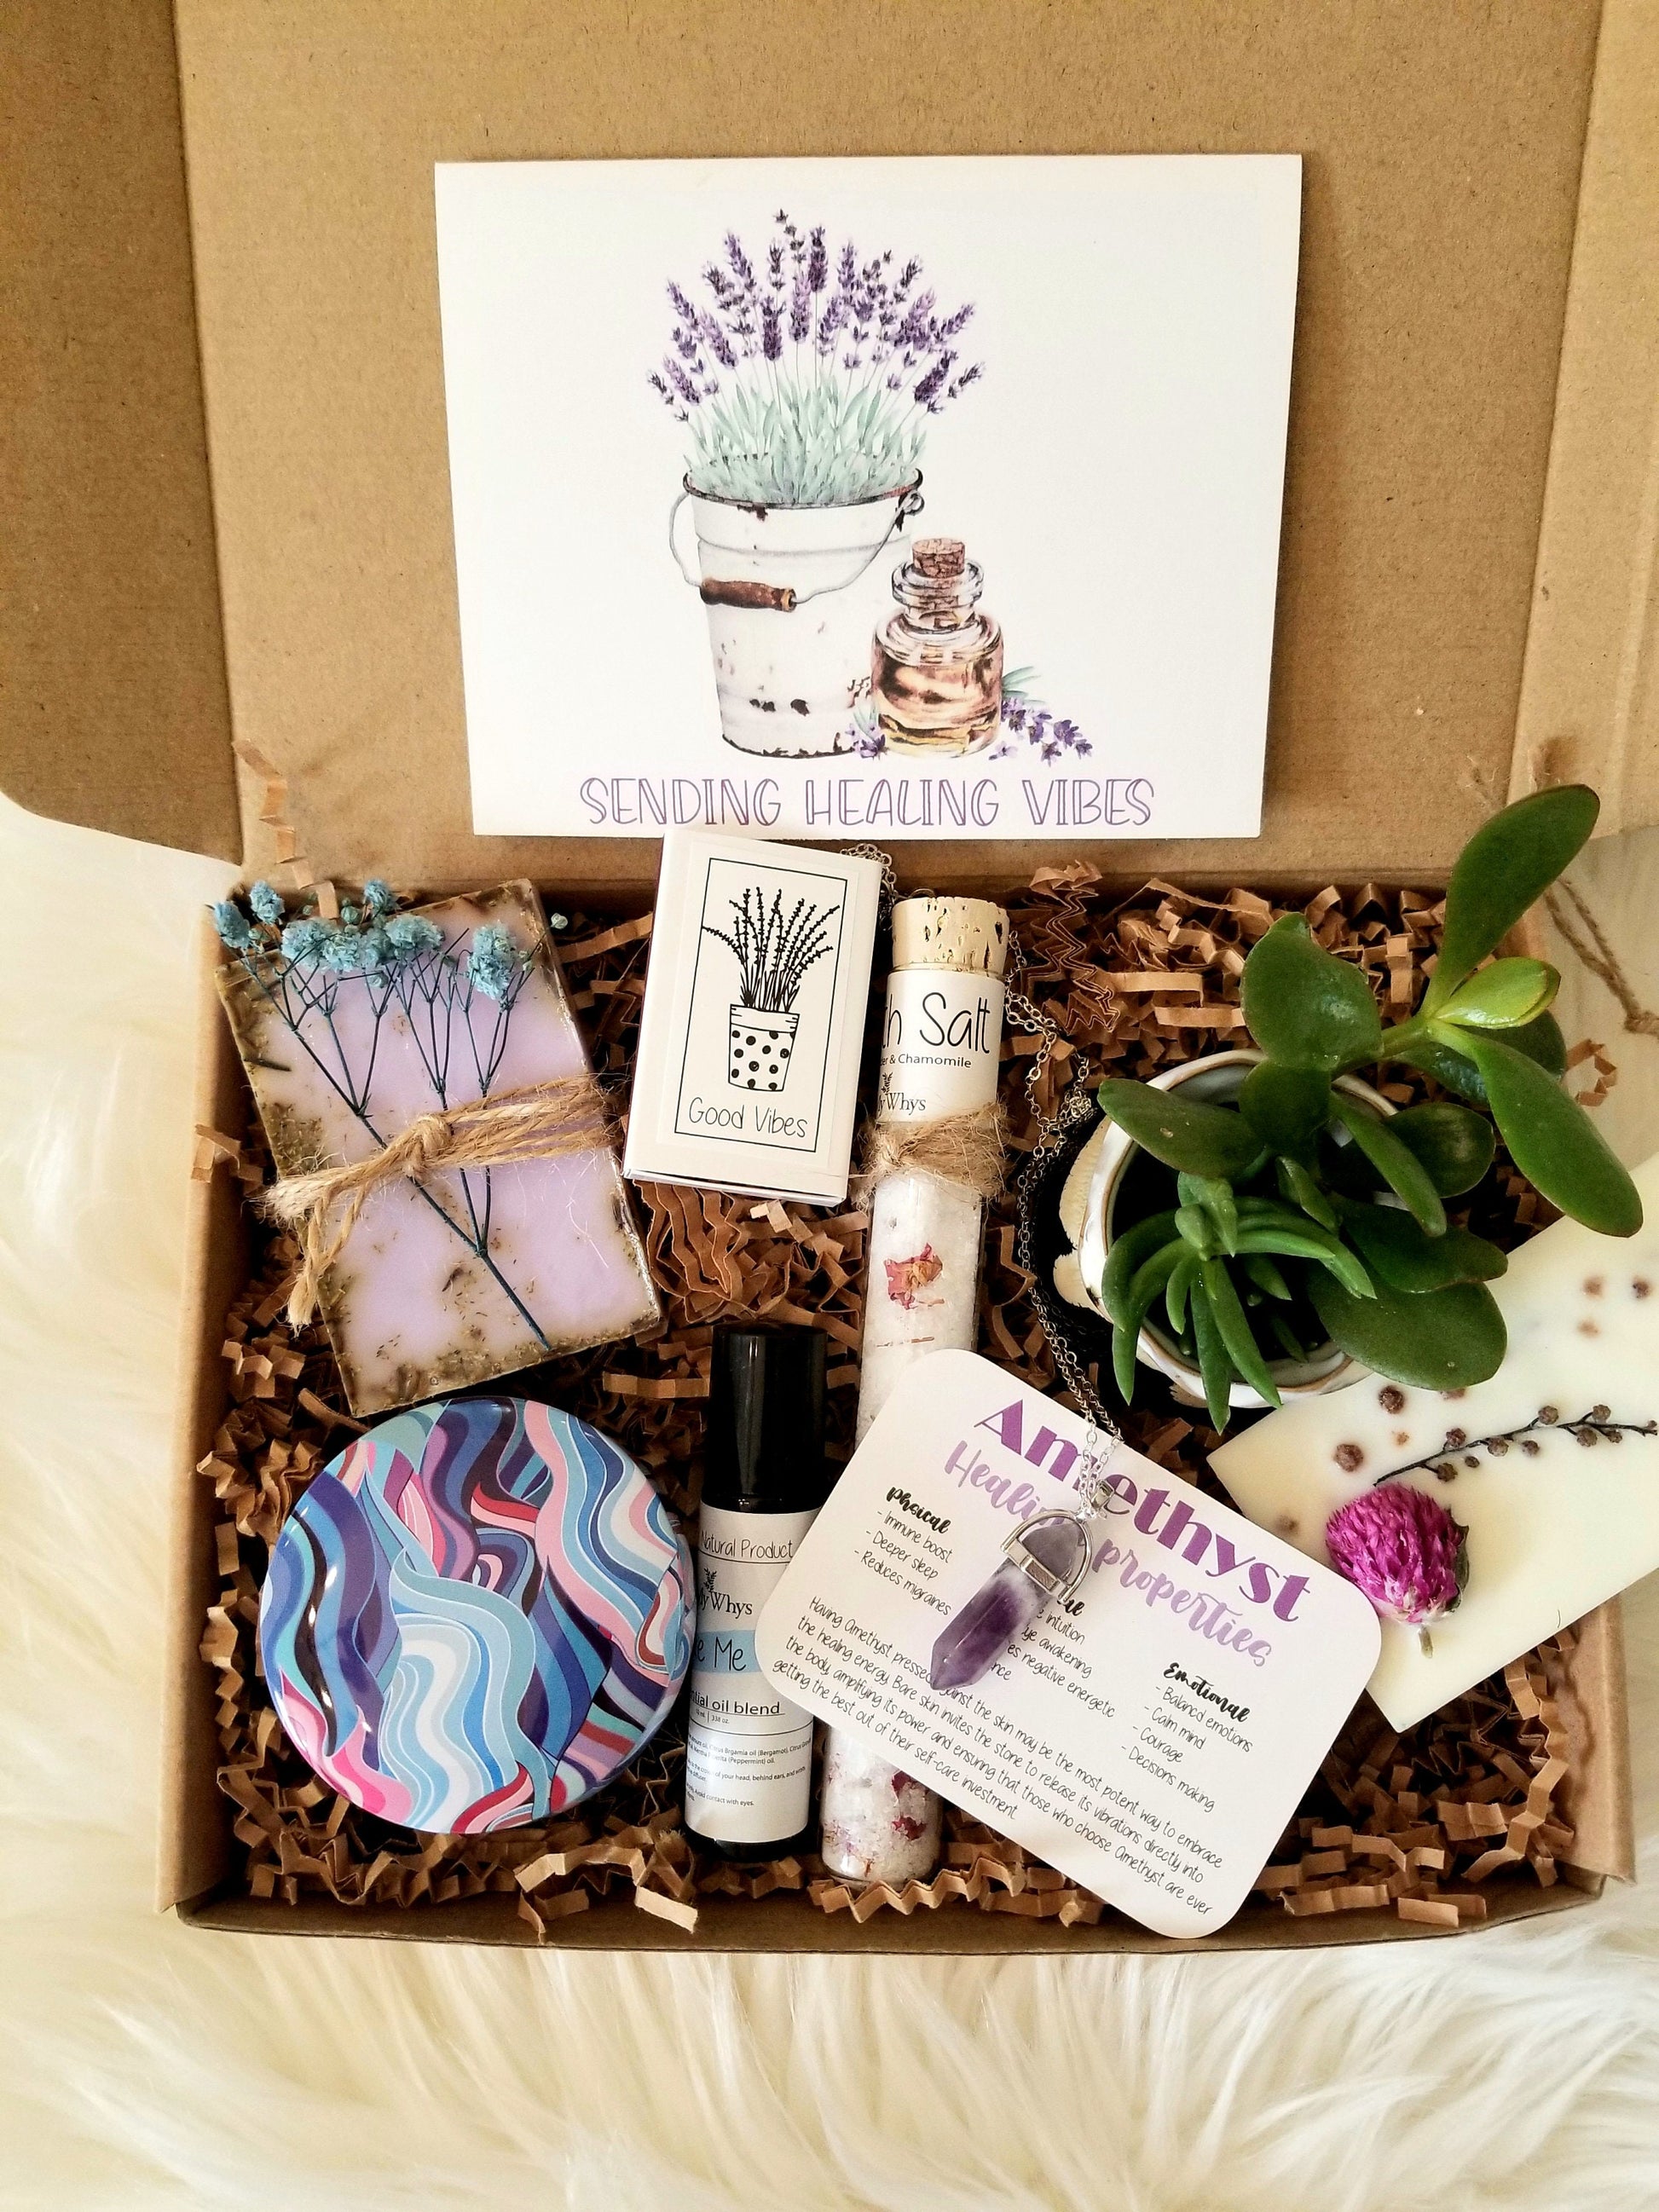 Sending healing vibes gift basket, Thinking of you care package, spiri –  My-Whys